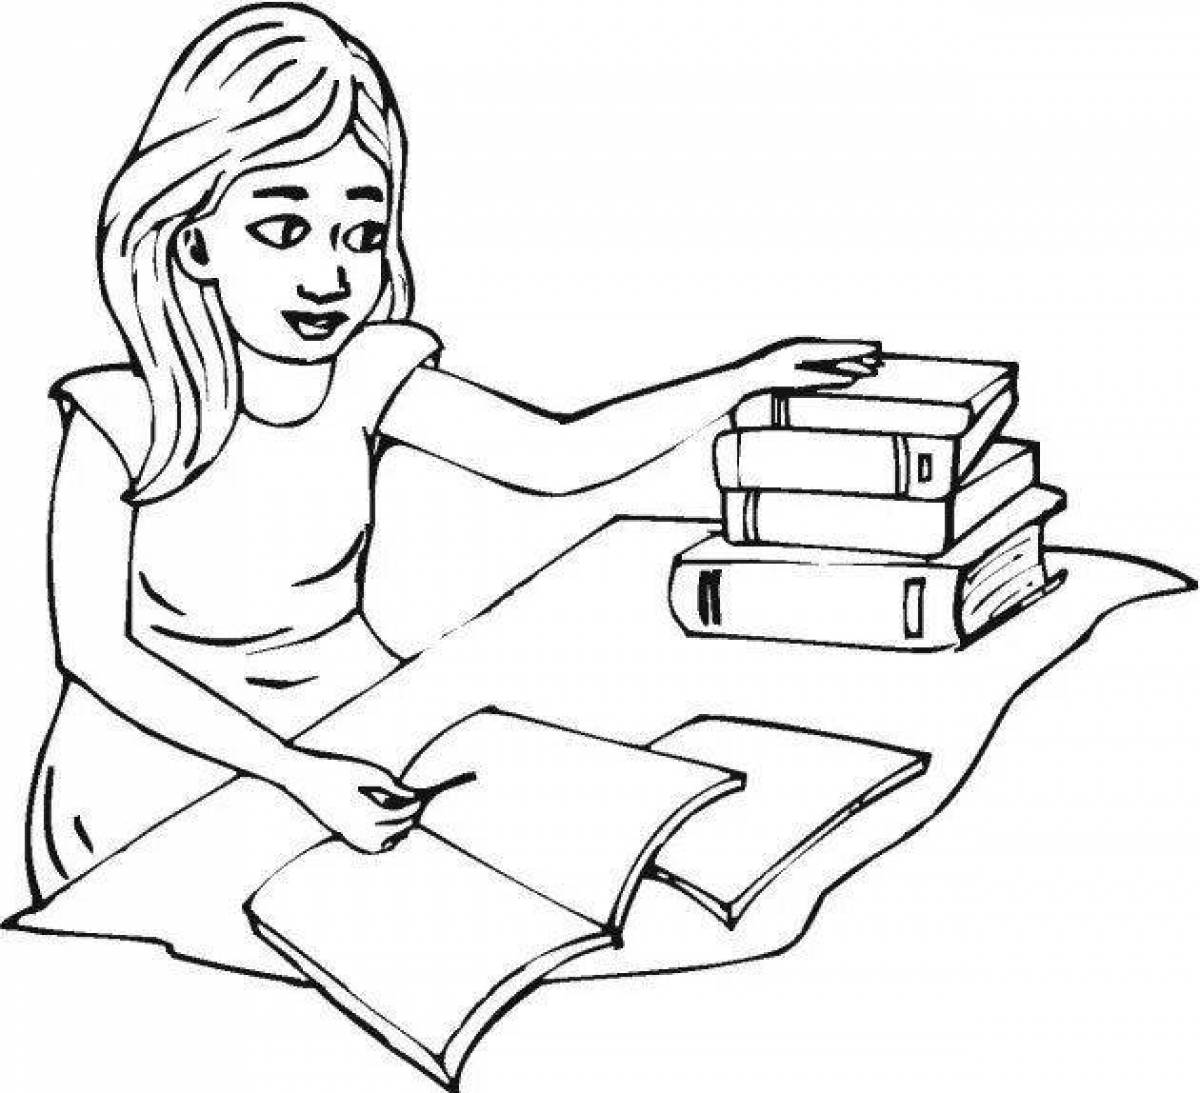 Colour-filled student coloring page